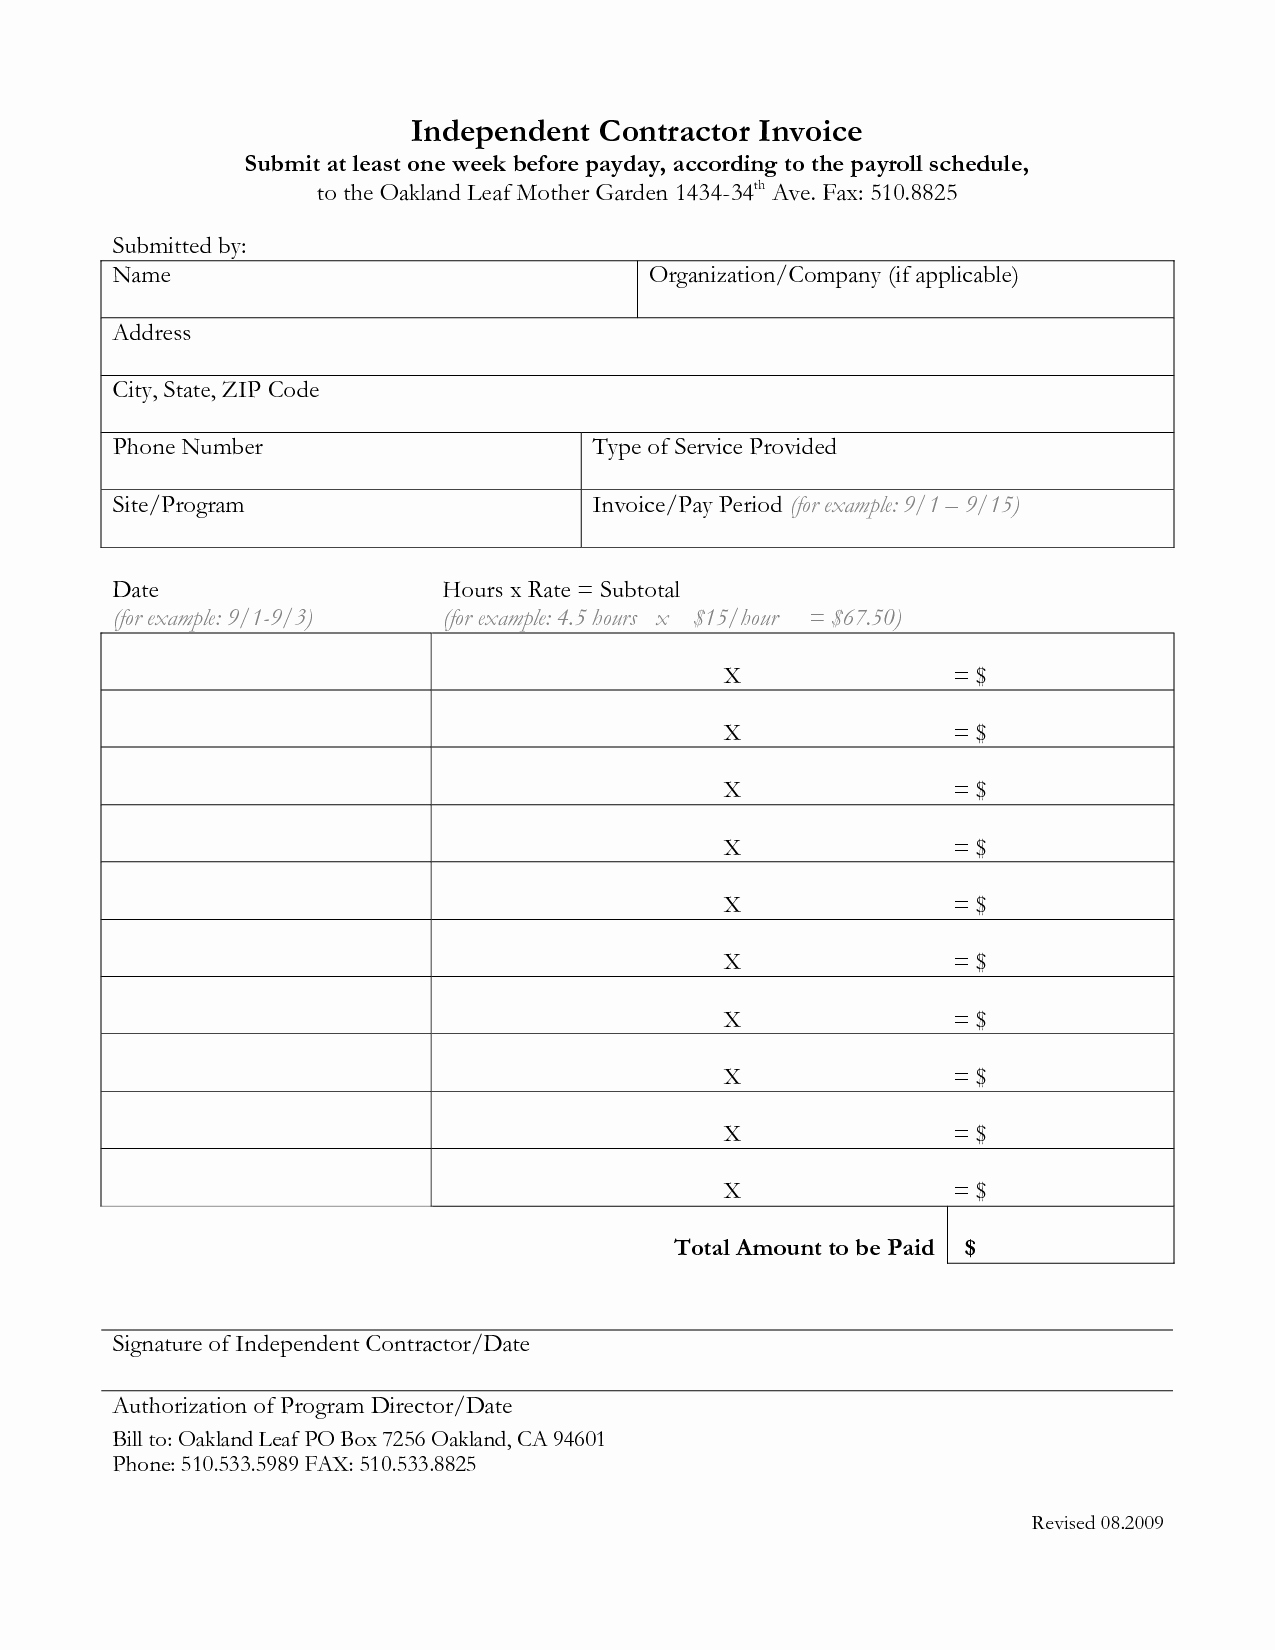 Contractor Invoice Template Word Fresh Independent Contractor Invoice Template Free